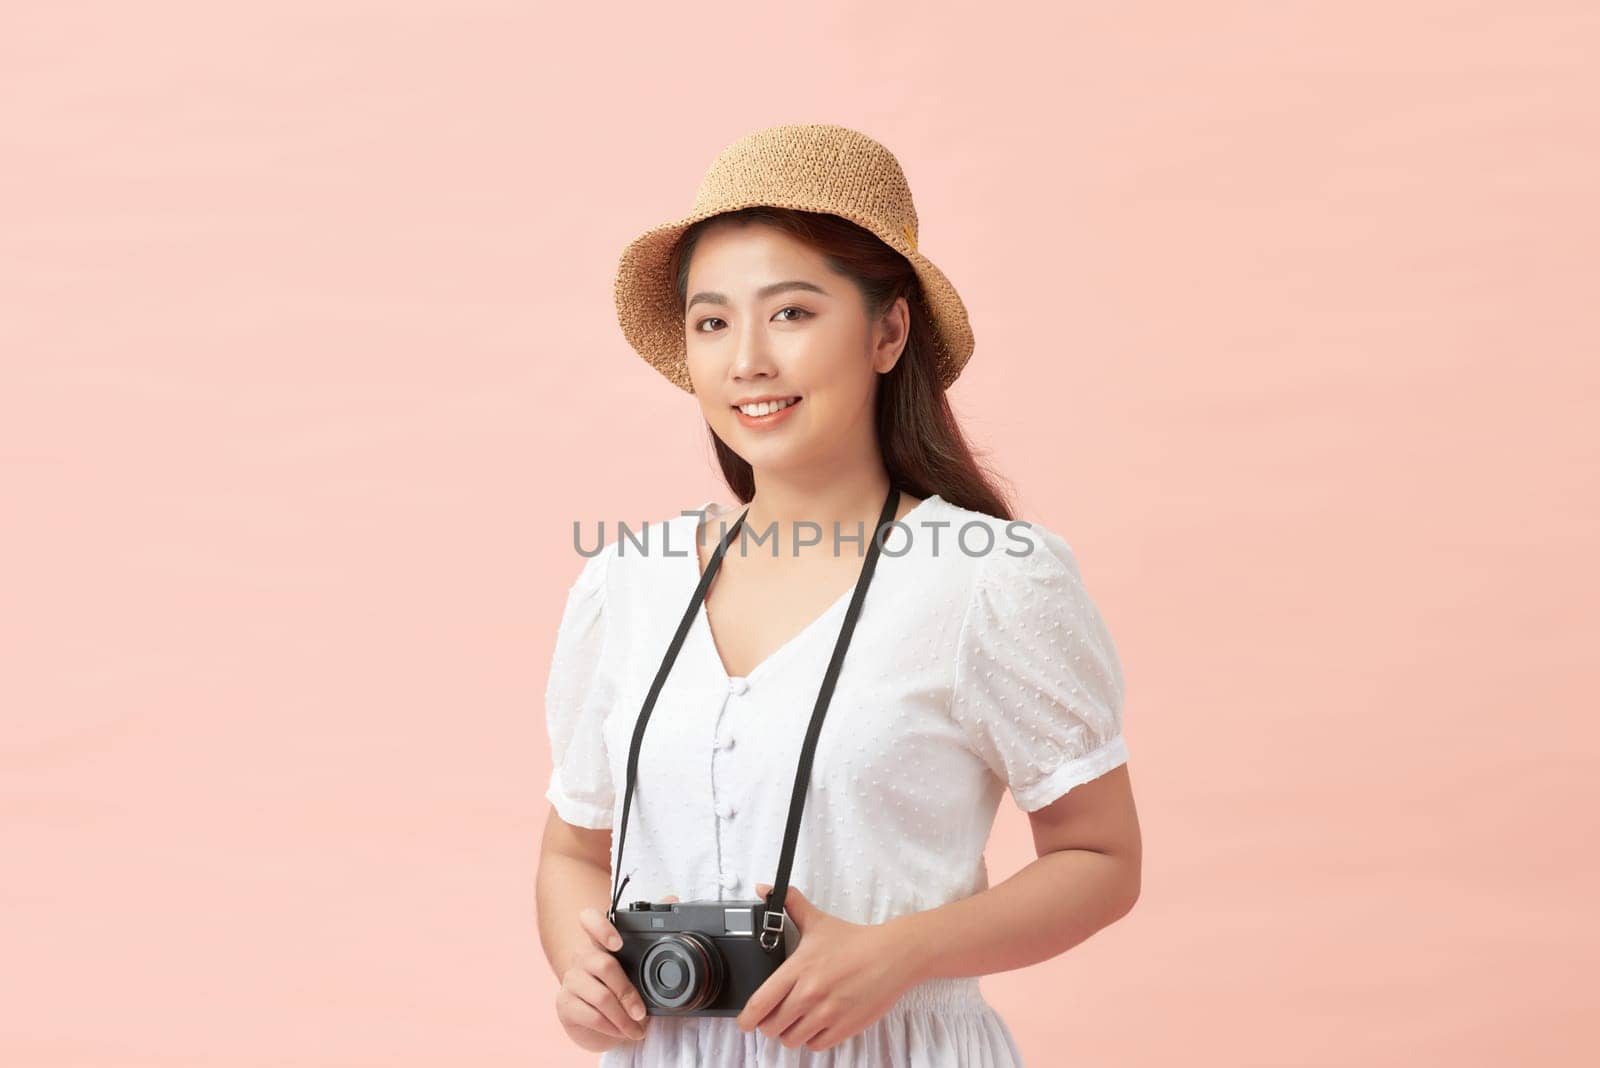 A smiling young woman in summer hat standing with photo camera isolated over pink background